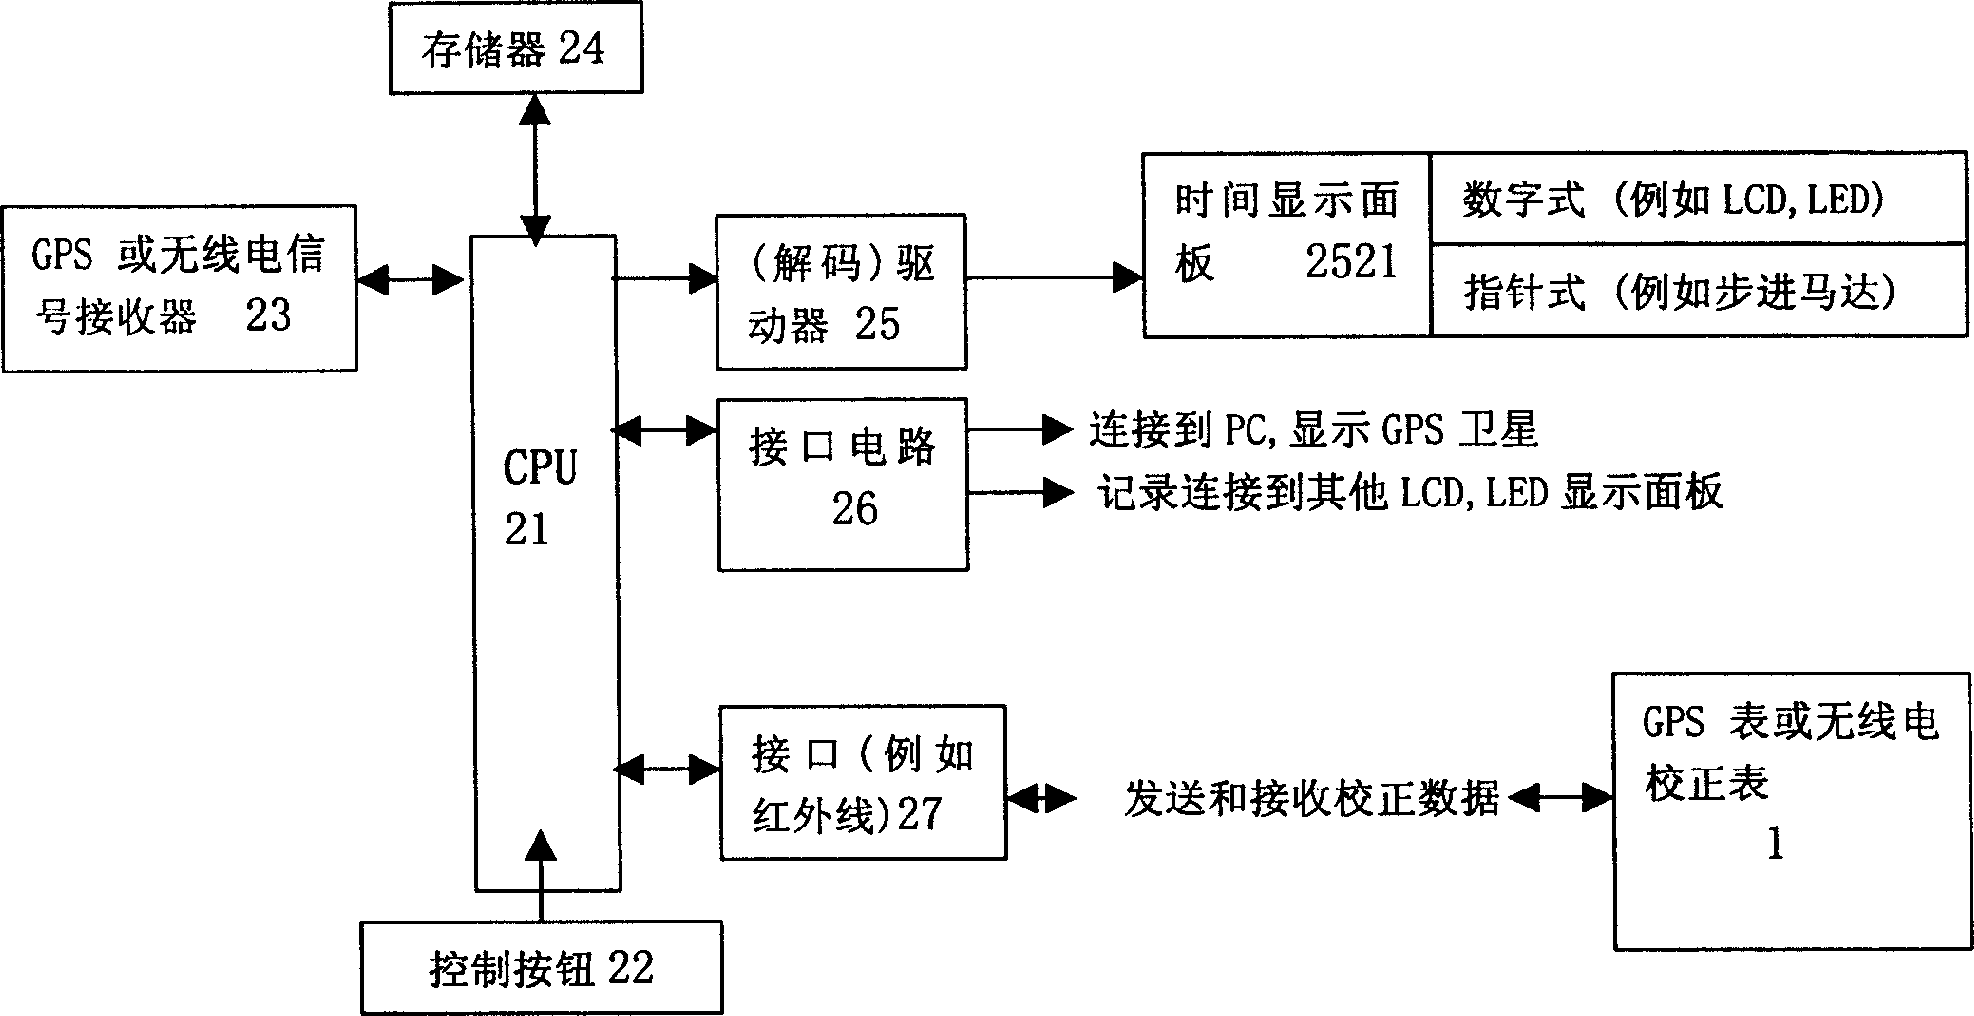 Low-power consumption precise timer and its precision correcting equipment, system and method